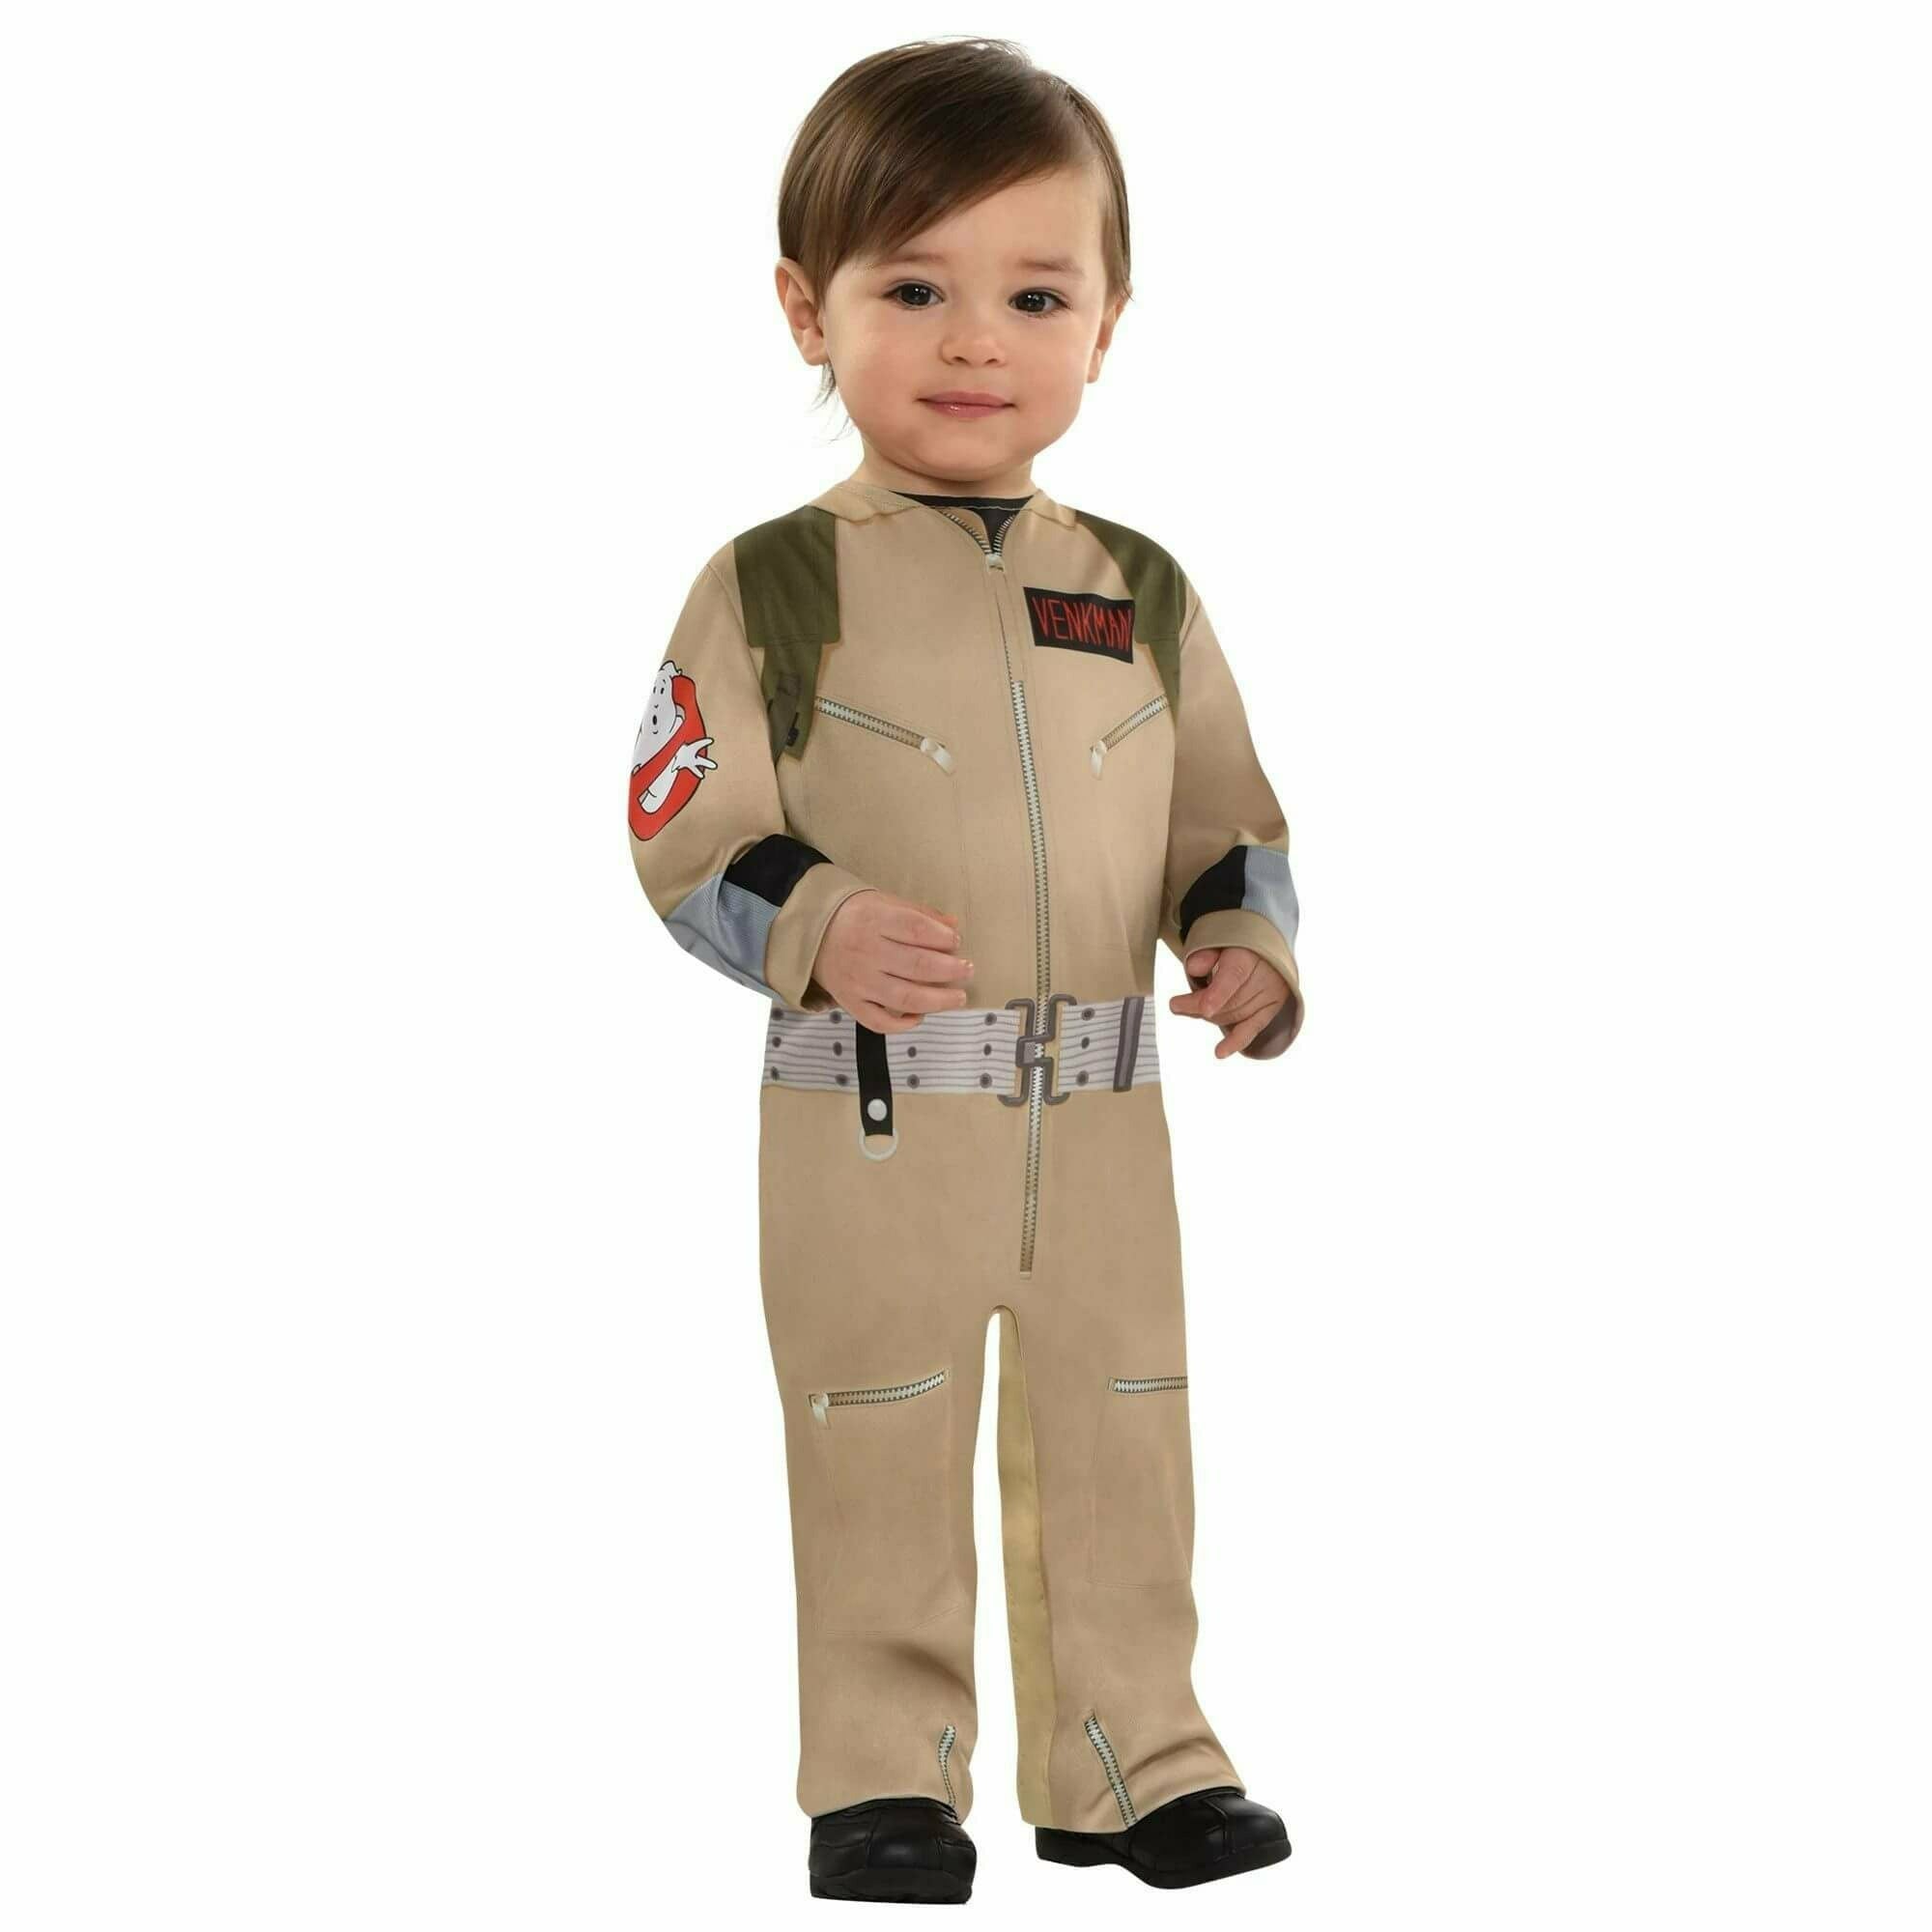 Amscan COSTUMES 6-12 Months Infant Ghostbusters Costume